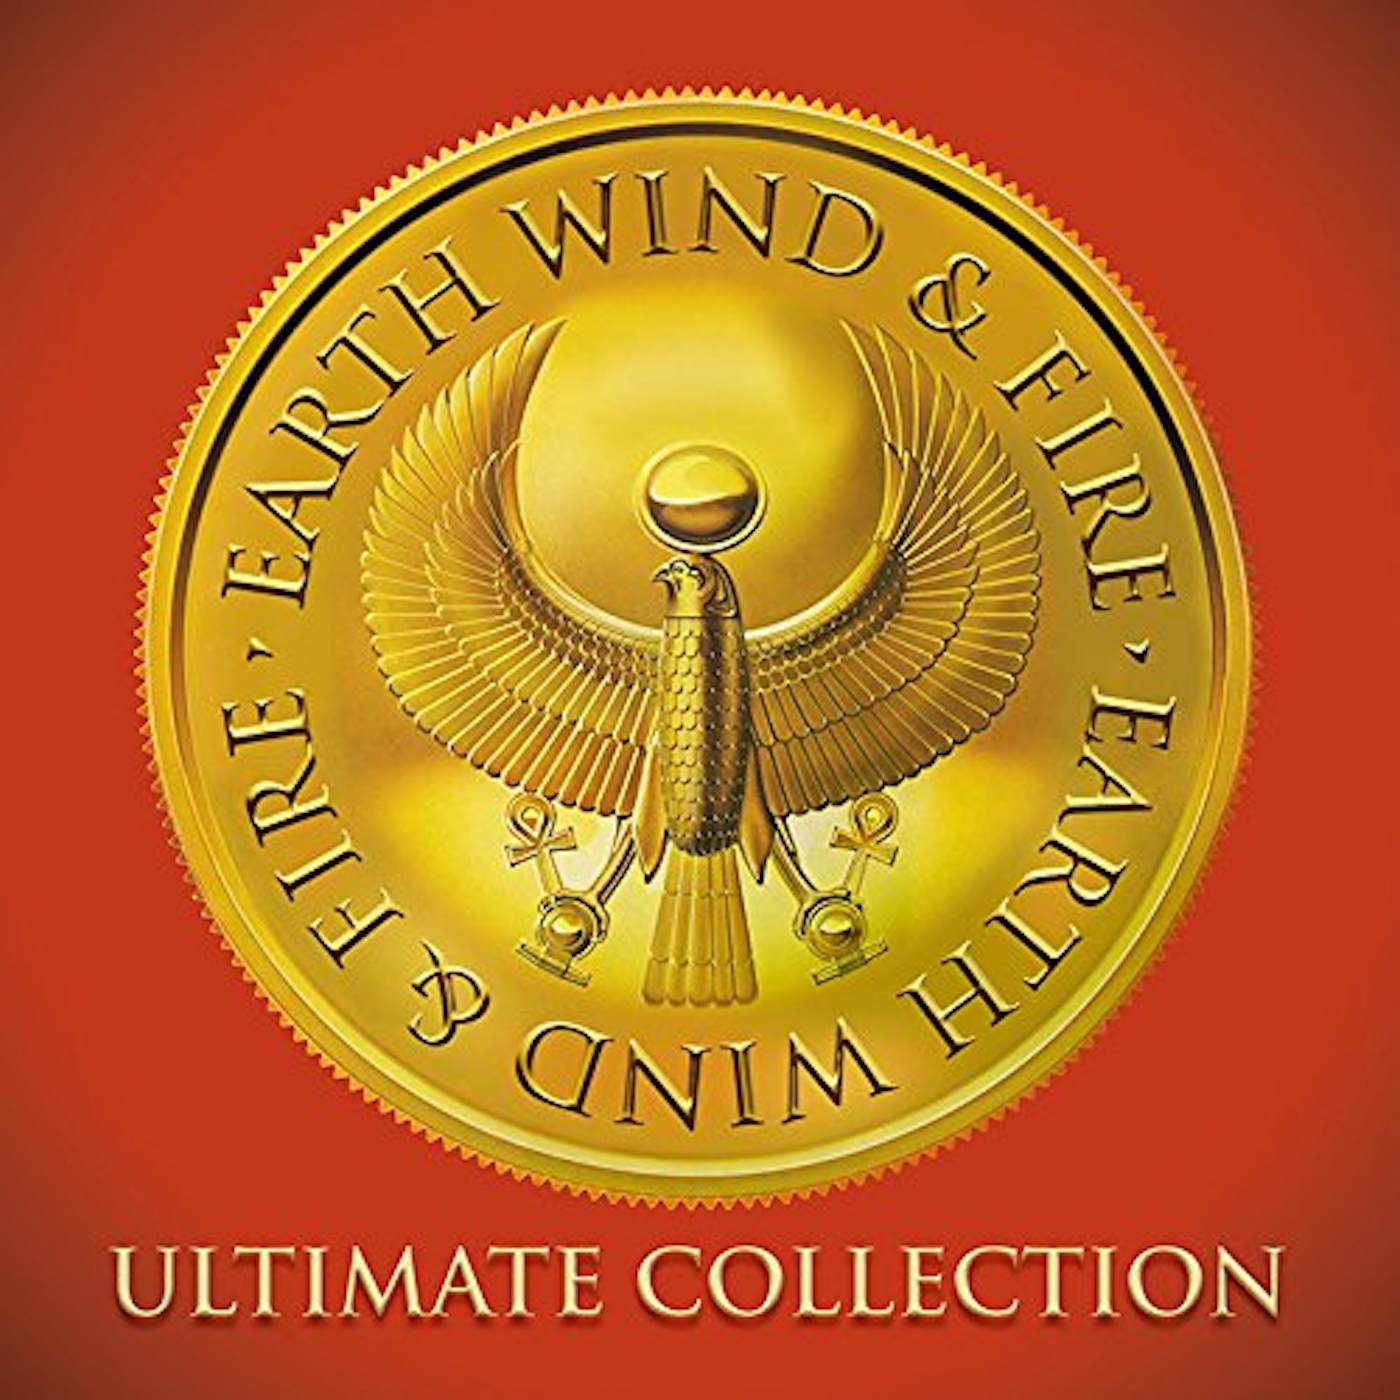 Earth, Wind & Fire ULTIMATE COLLECTION CD